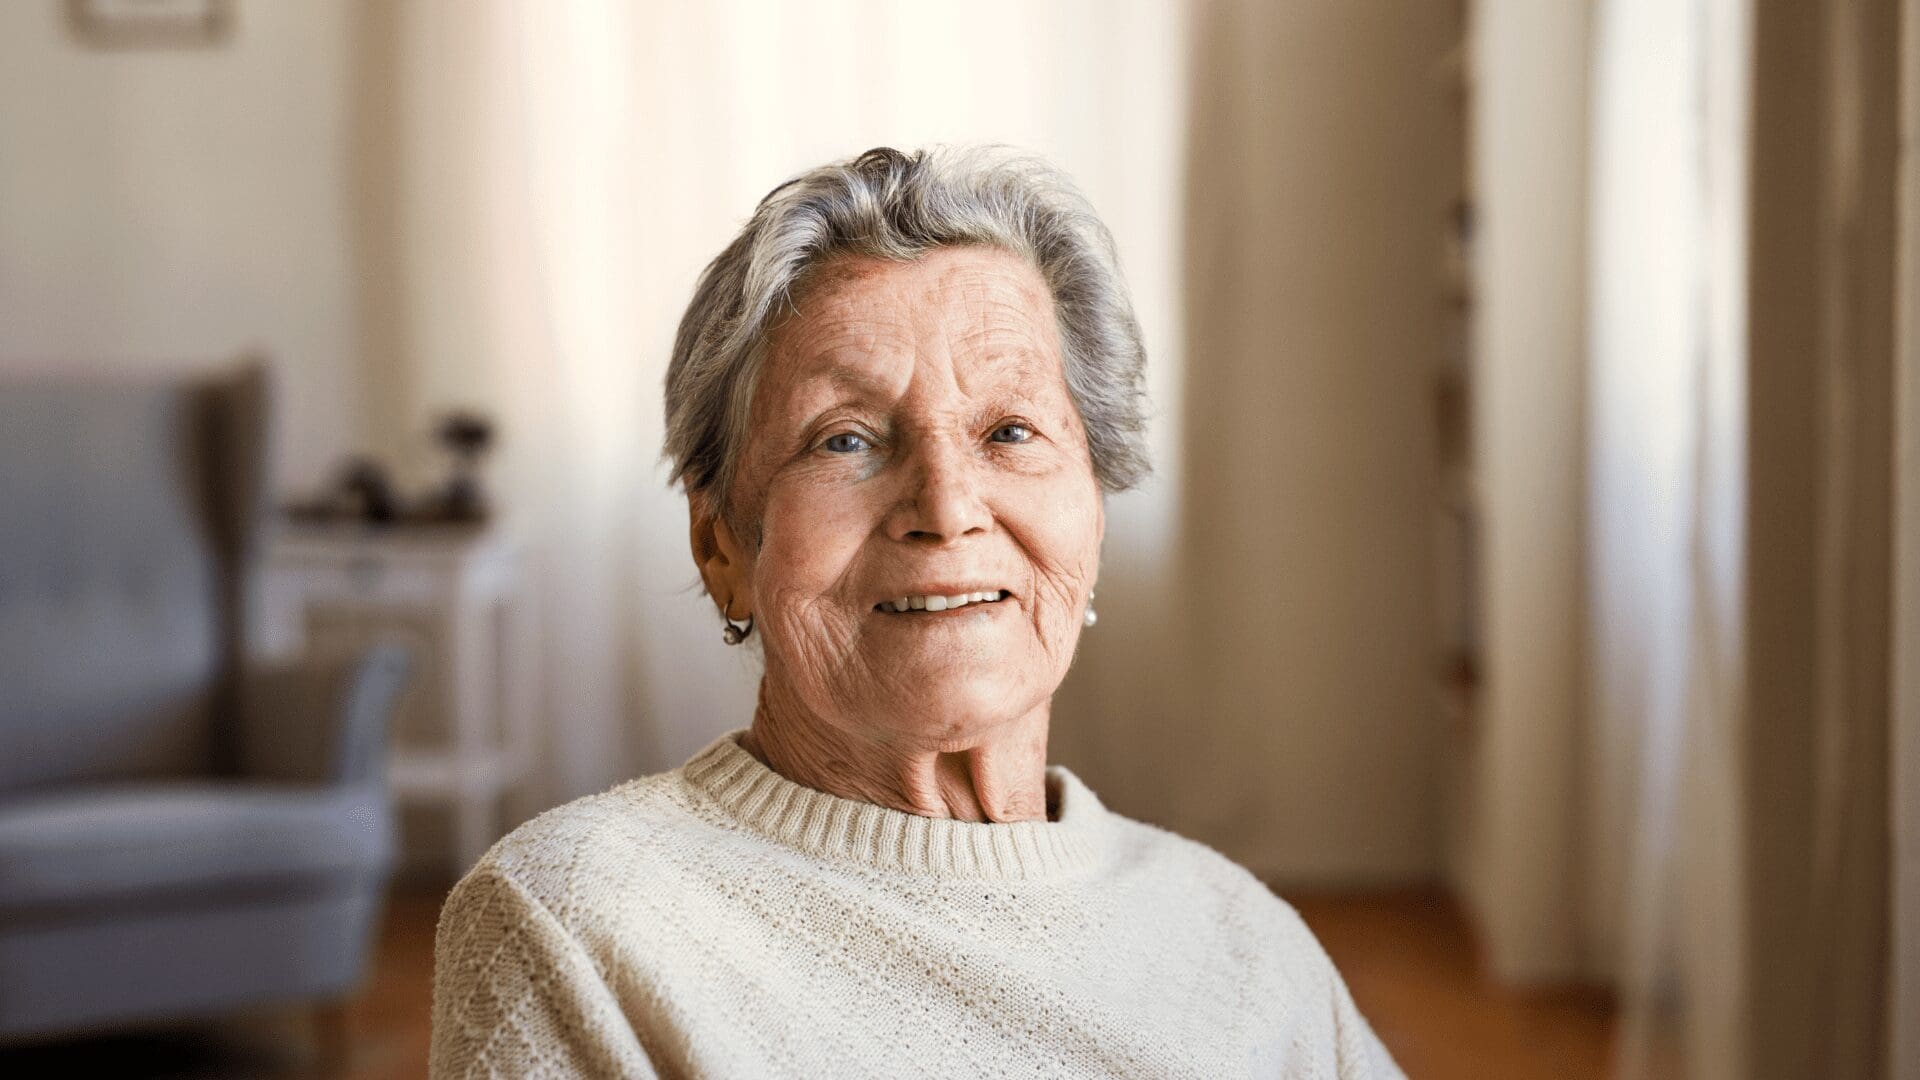 Elderly lady at home looking into camera